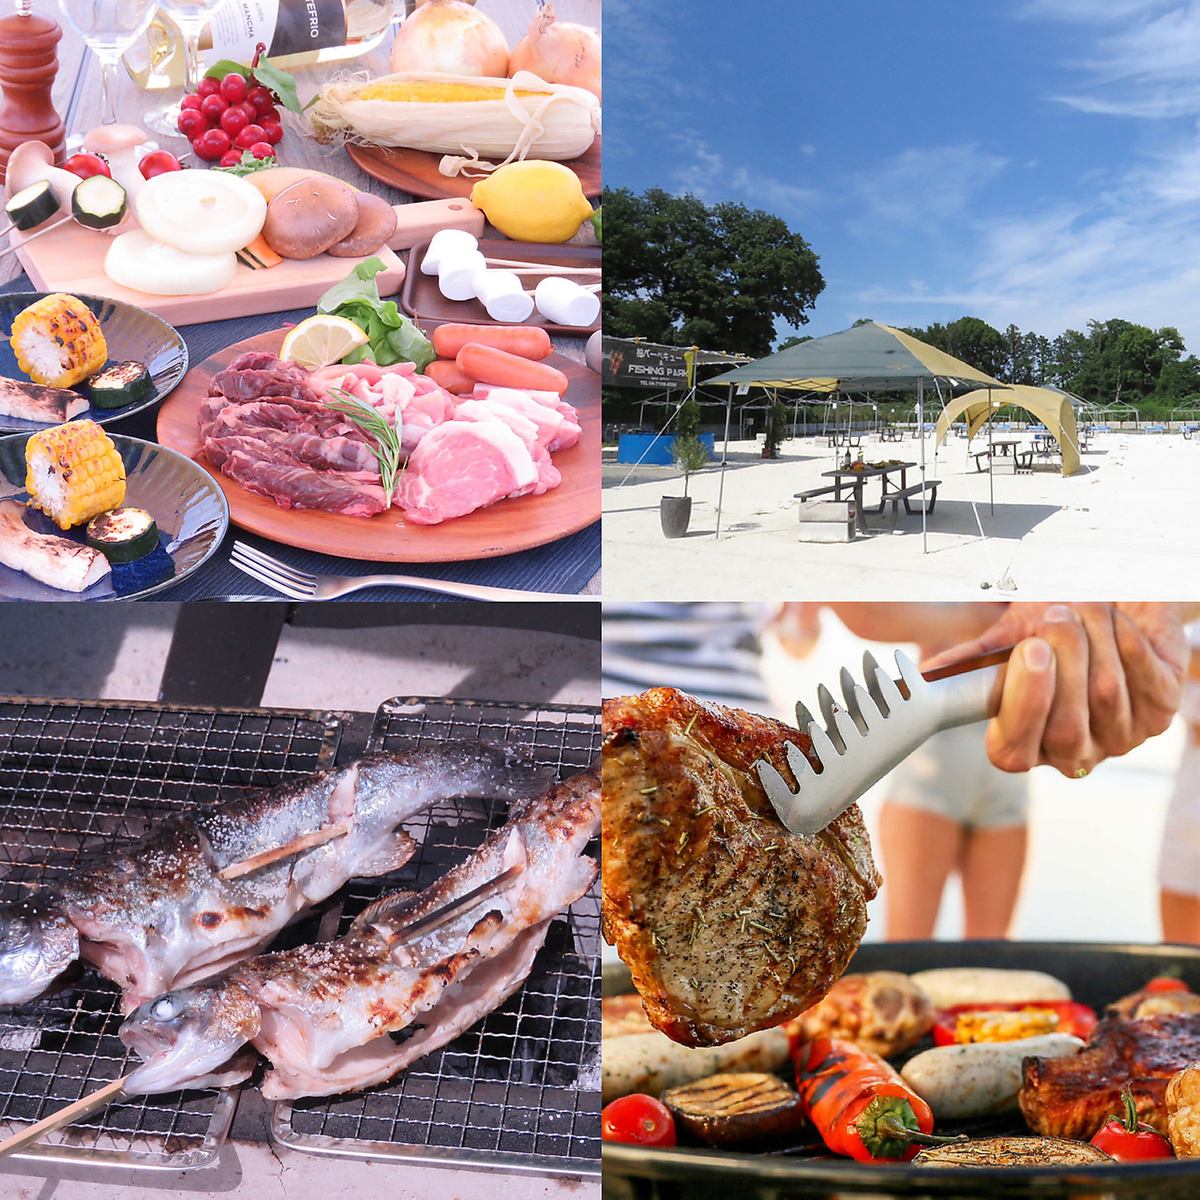 [5 minutes by car from Takayanagi Station / OK without reservation] BBQ place on the coral sandy beach where you can easily enjoy BBQ and fishing